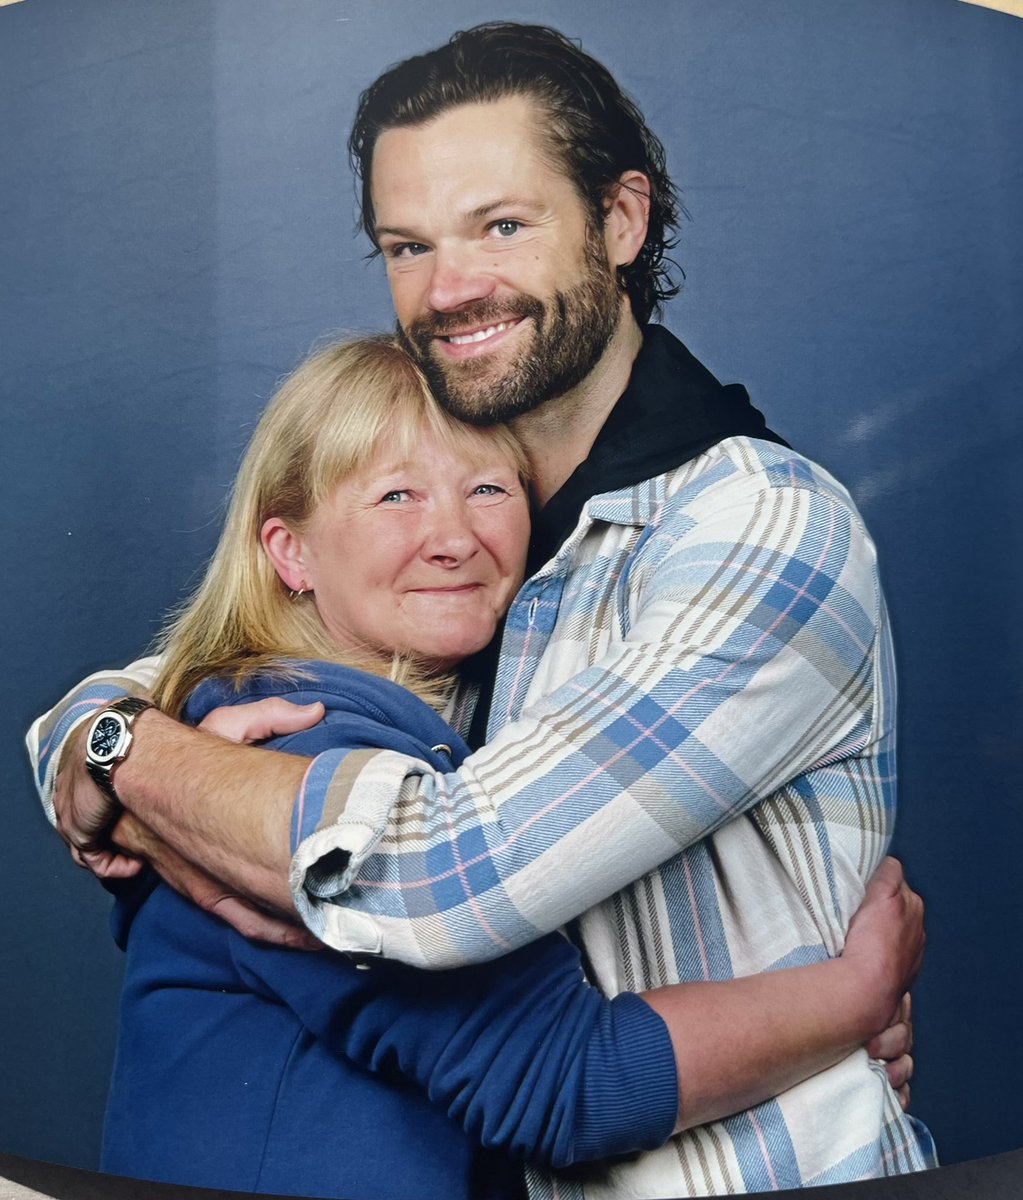 This man is an angel. So kind, so lovely. Thank you @jarpad for calming me and making me feel so special! (I know you do with everyone 😊) but I will never forget this moment ❤️ Thank you @comconliverpool for bringing him to Liverpool.